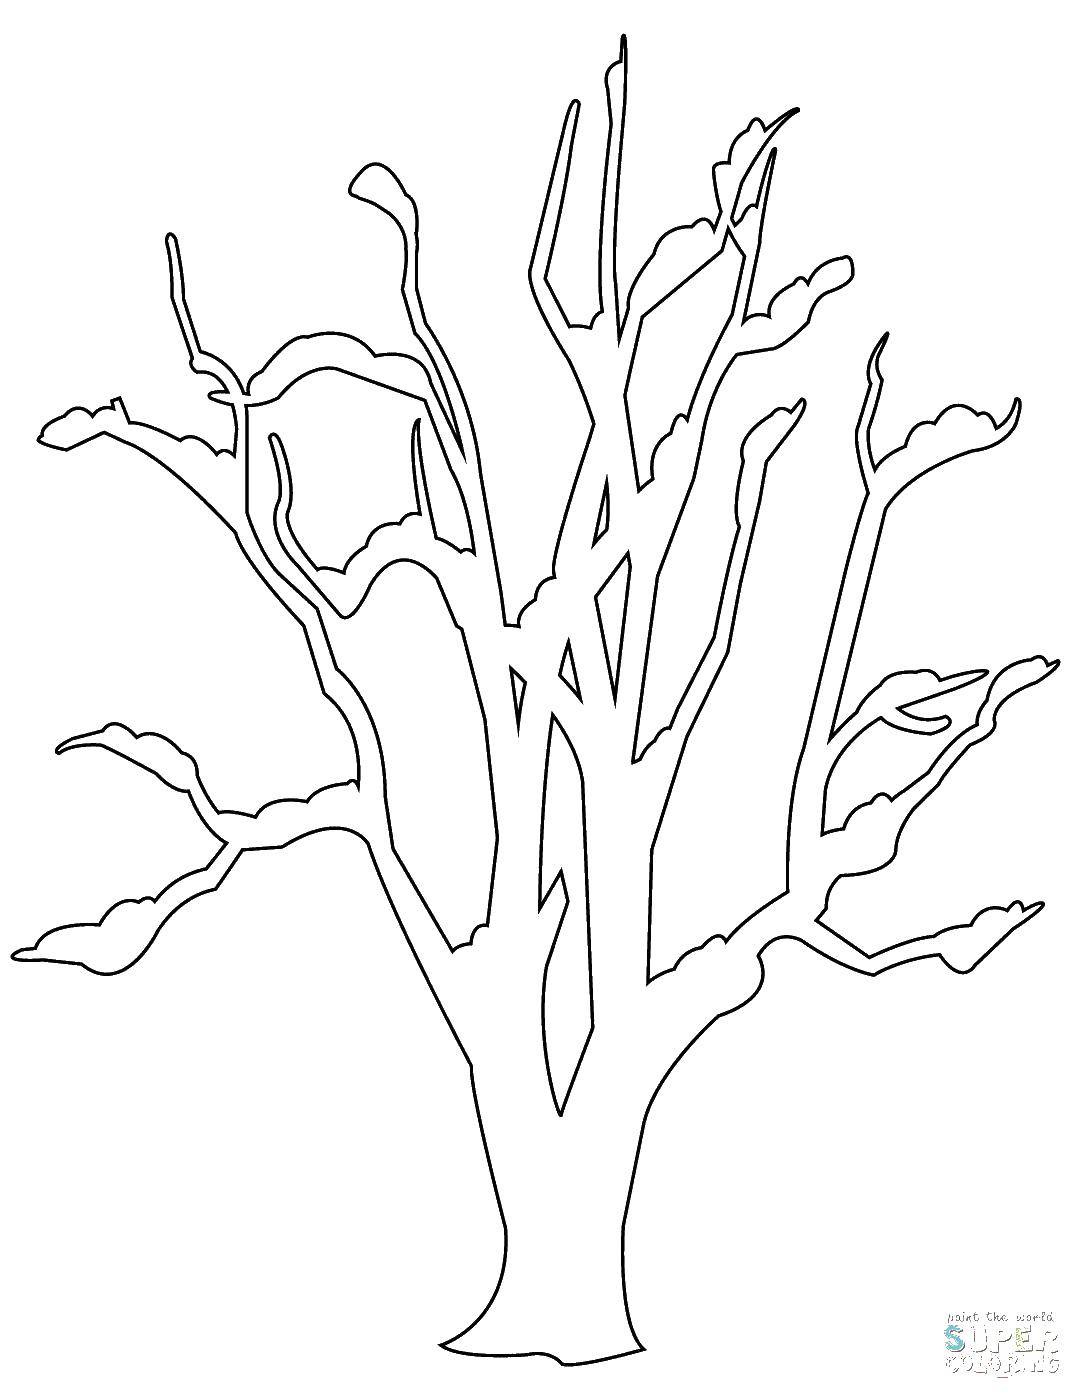 Coloring Tree without leaves. Category tree. Tags:  Family tree, tree.